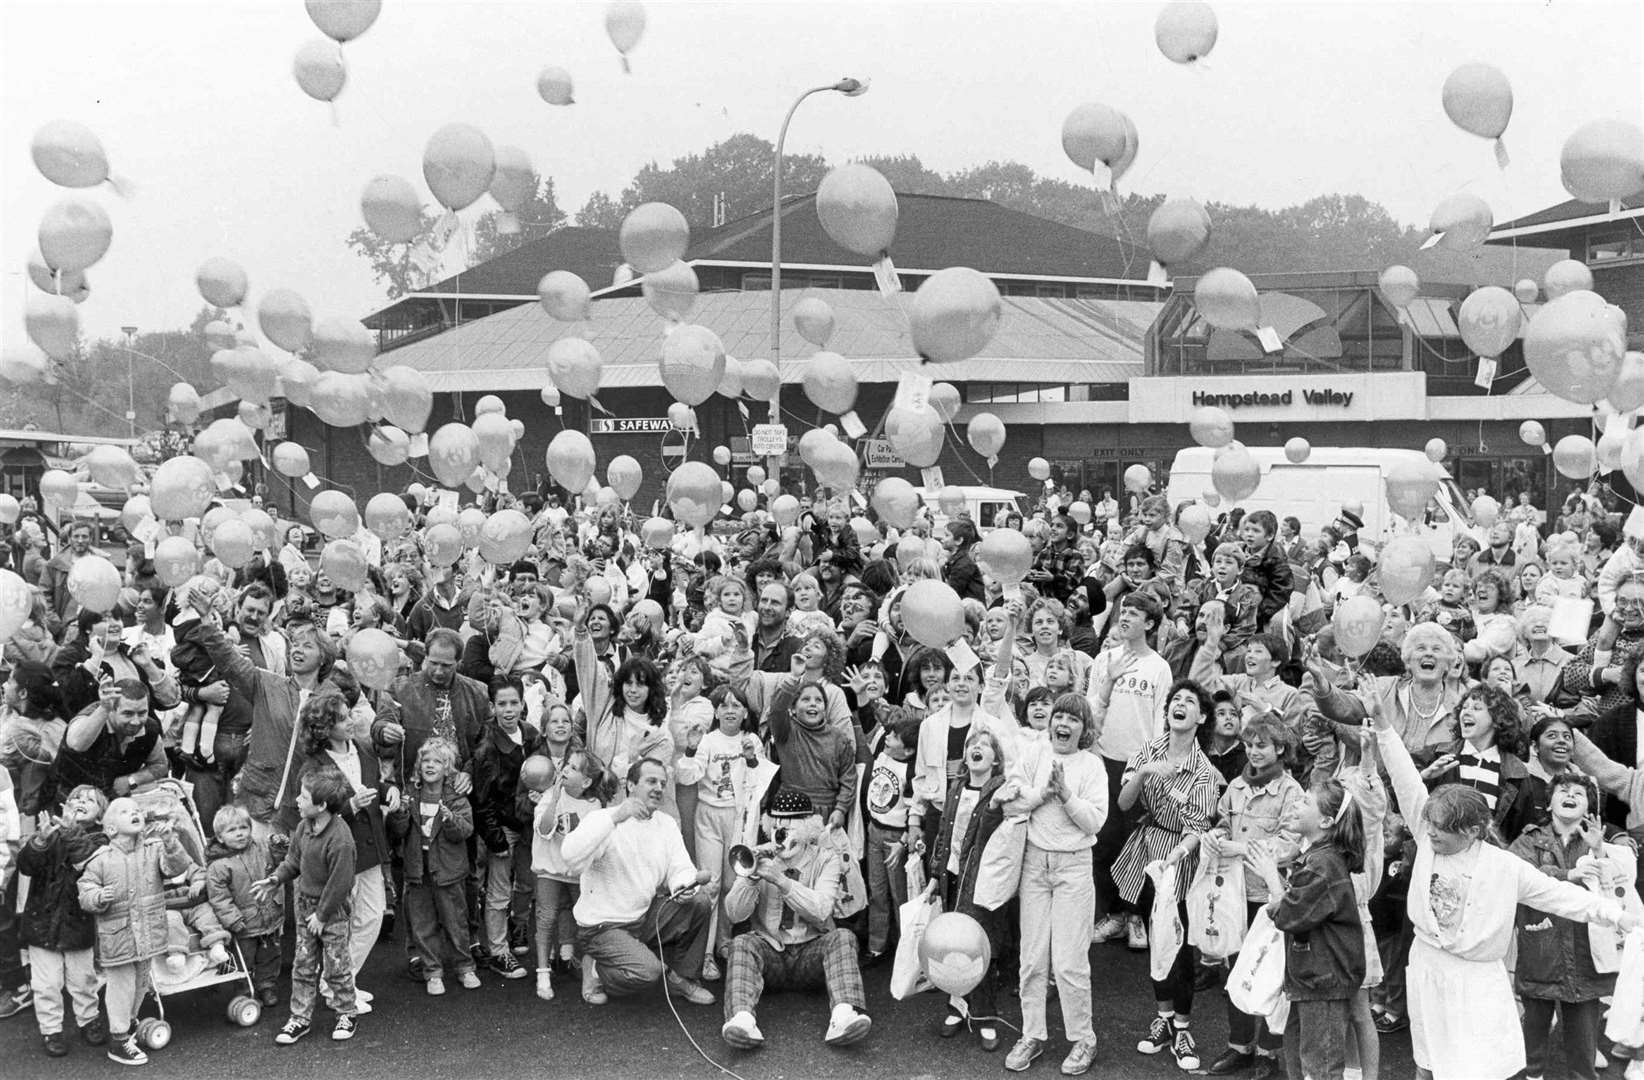 The releasing of balloons for the 10th anniversary of Hempstead Valley Shopping centre in 1988. Picture: Images of Medway book